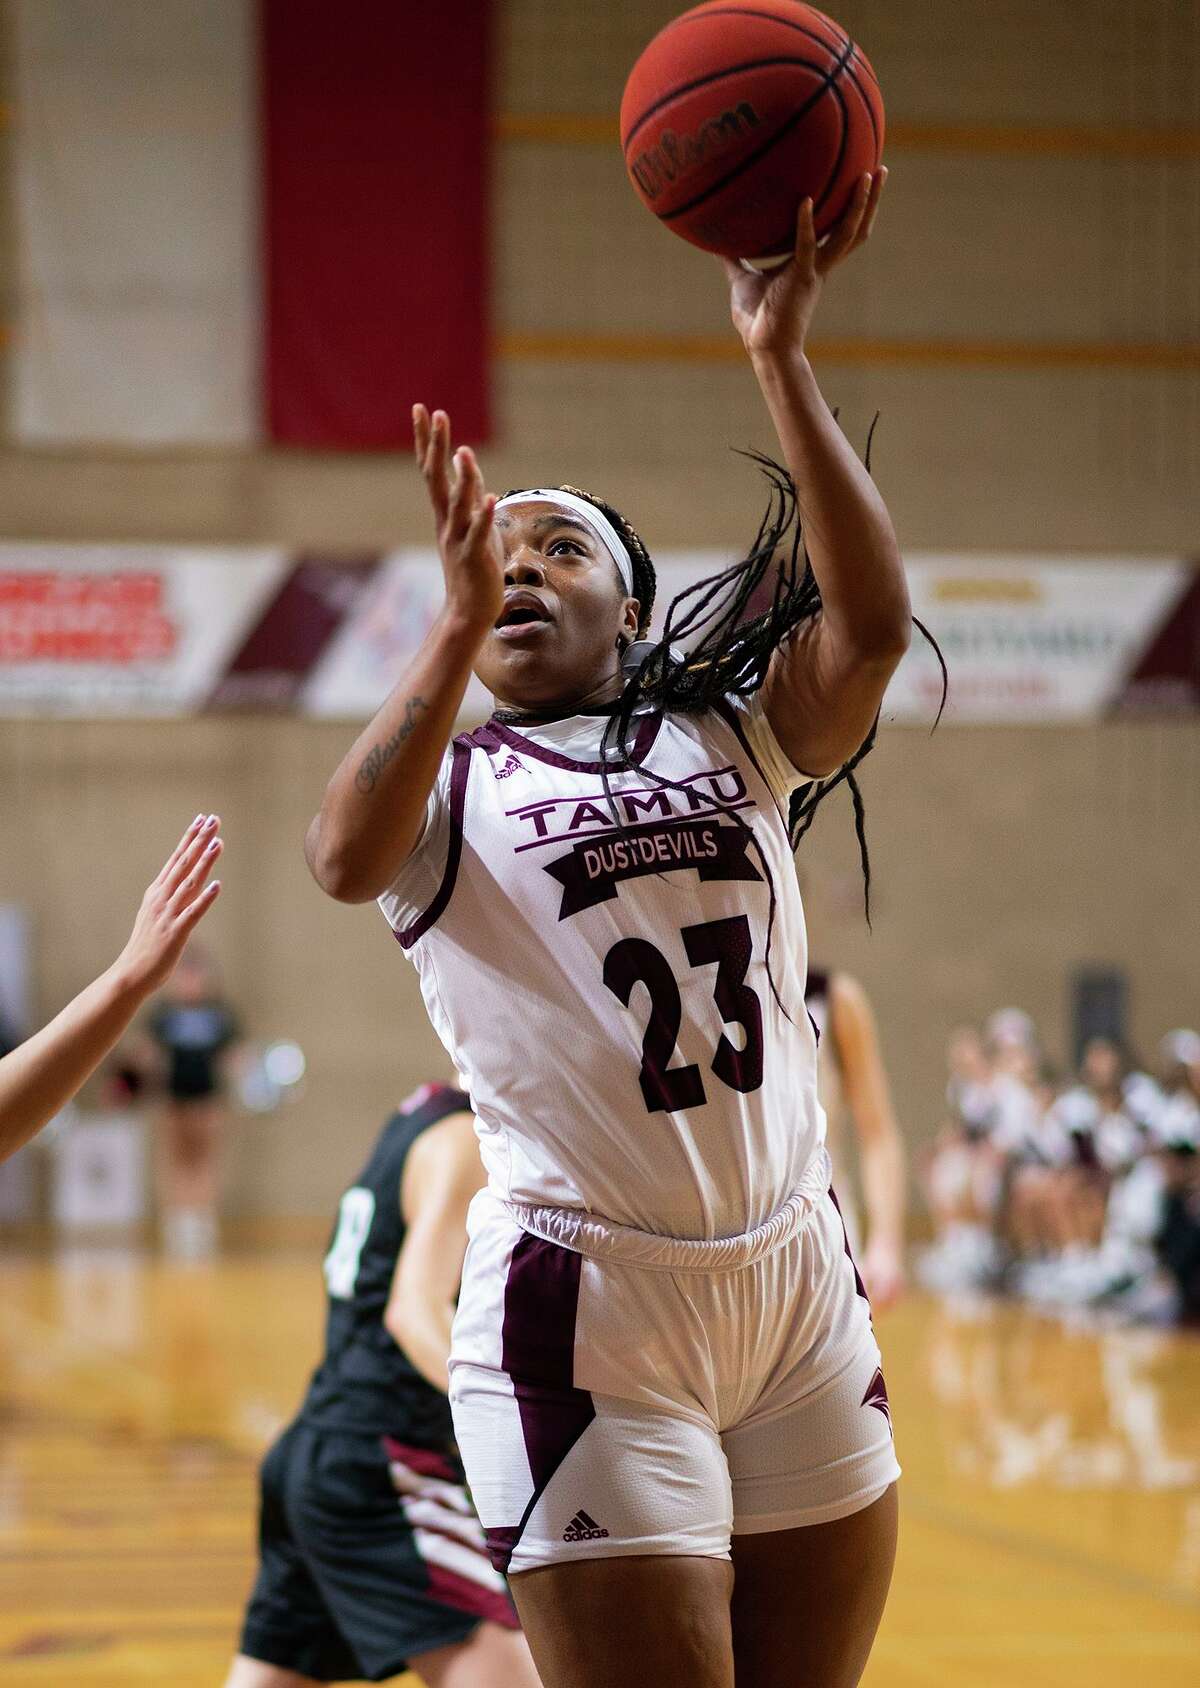 Rai Brown scored 19 points to help the Texas A&M International Dustdevils beat Chadron State on Saturday.